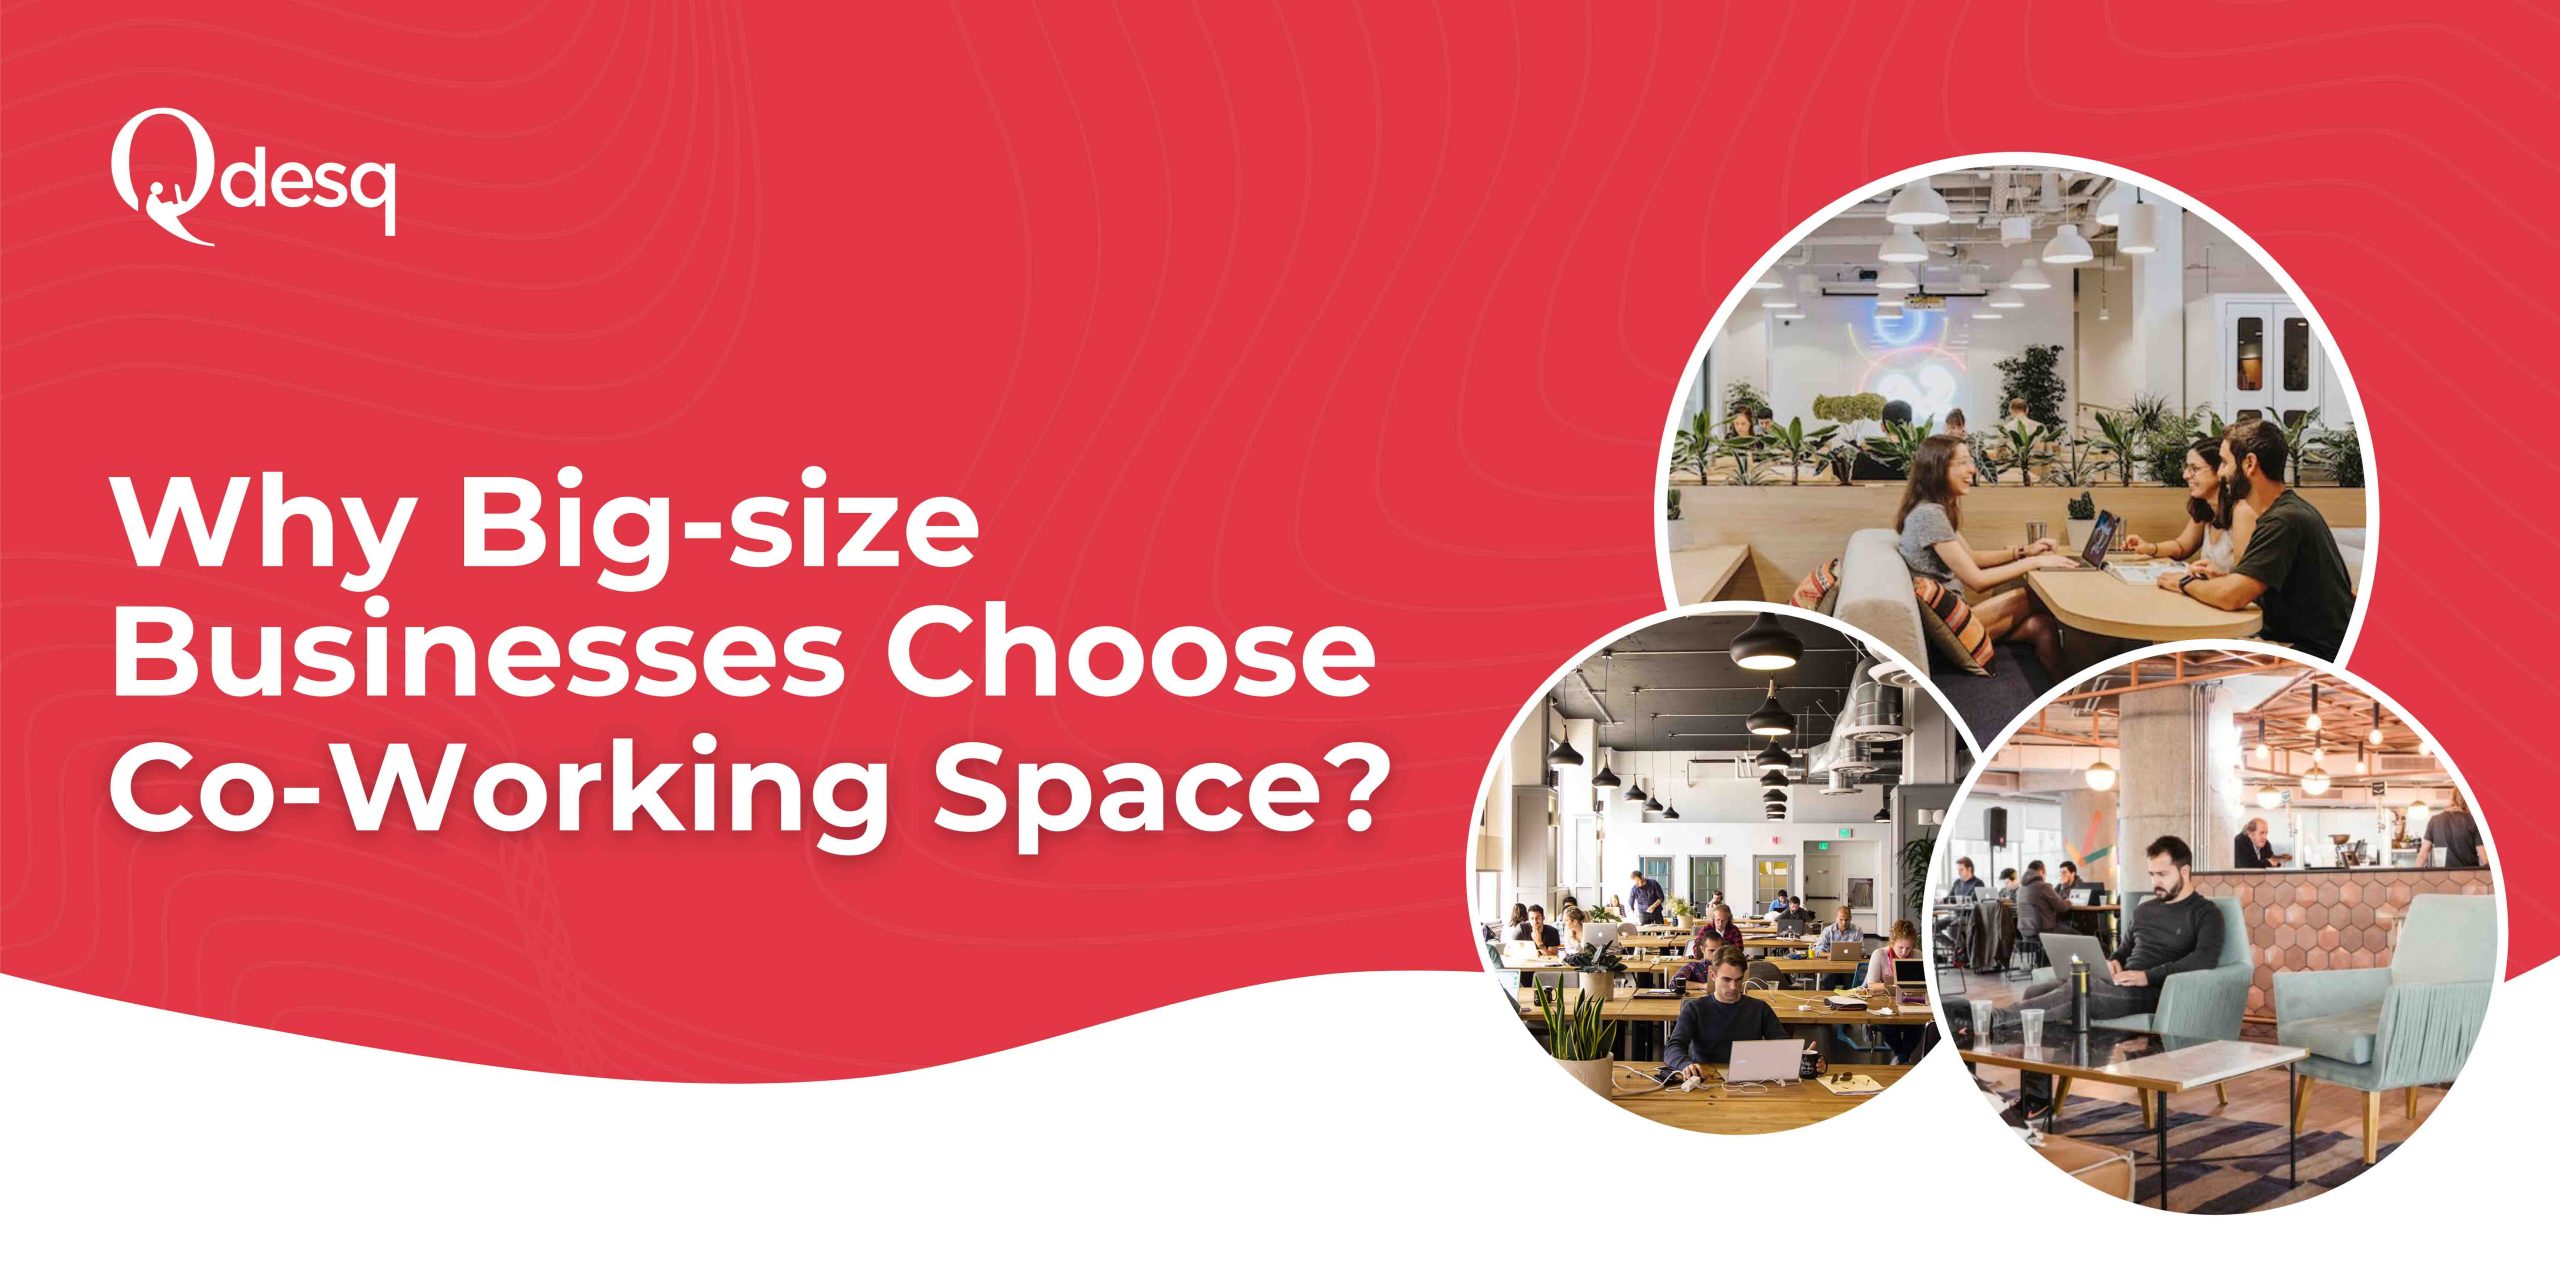 Why Big-size Businesses Choose Co-Working Spaces?